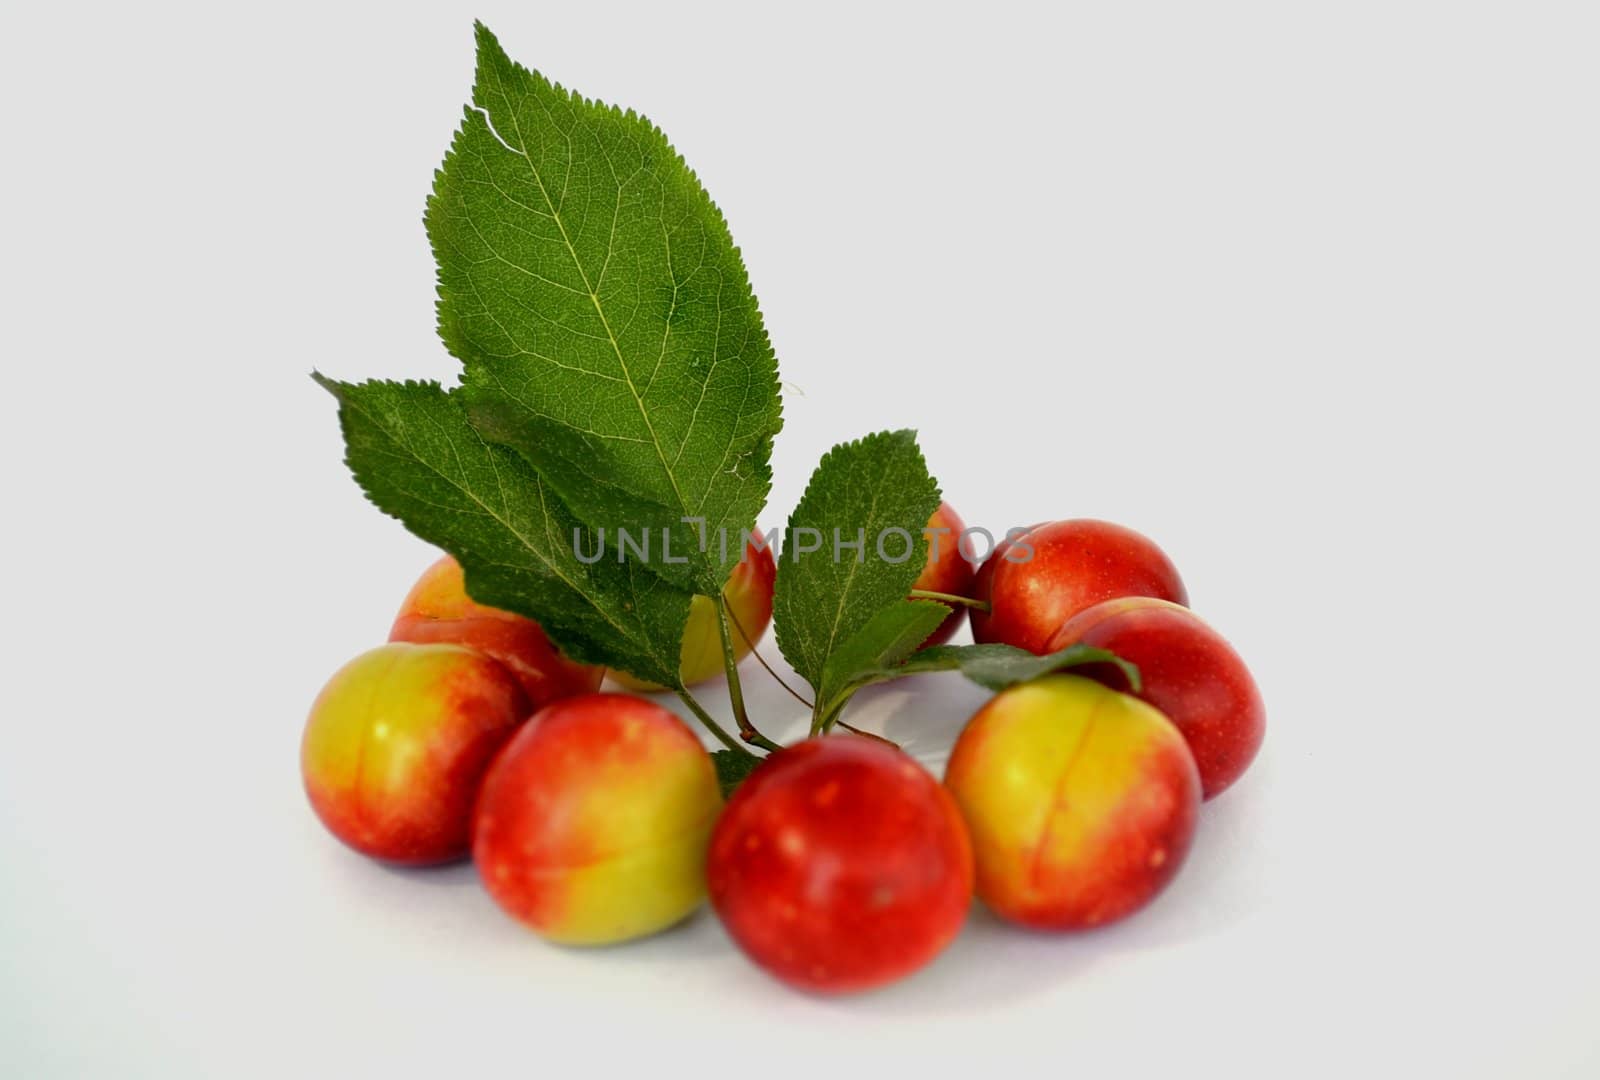 juicy plum on a white background